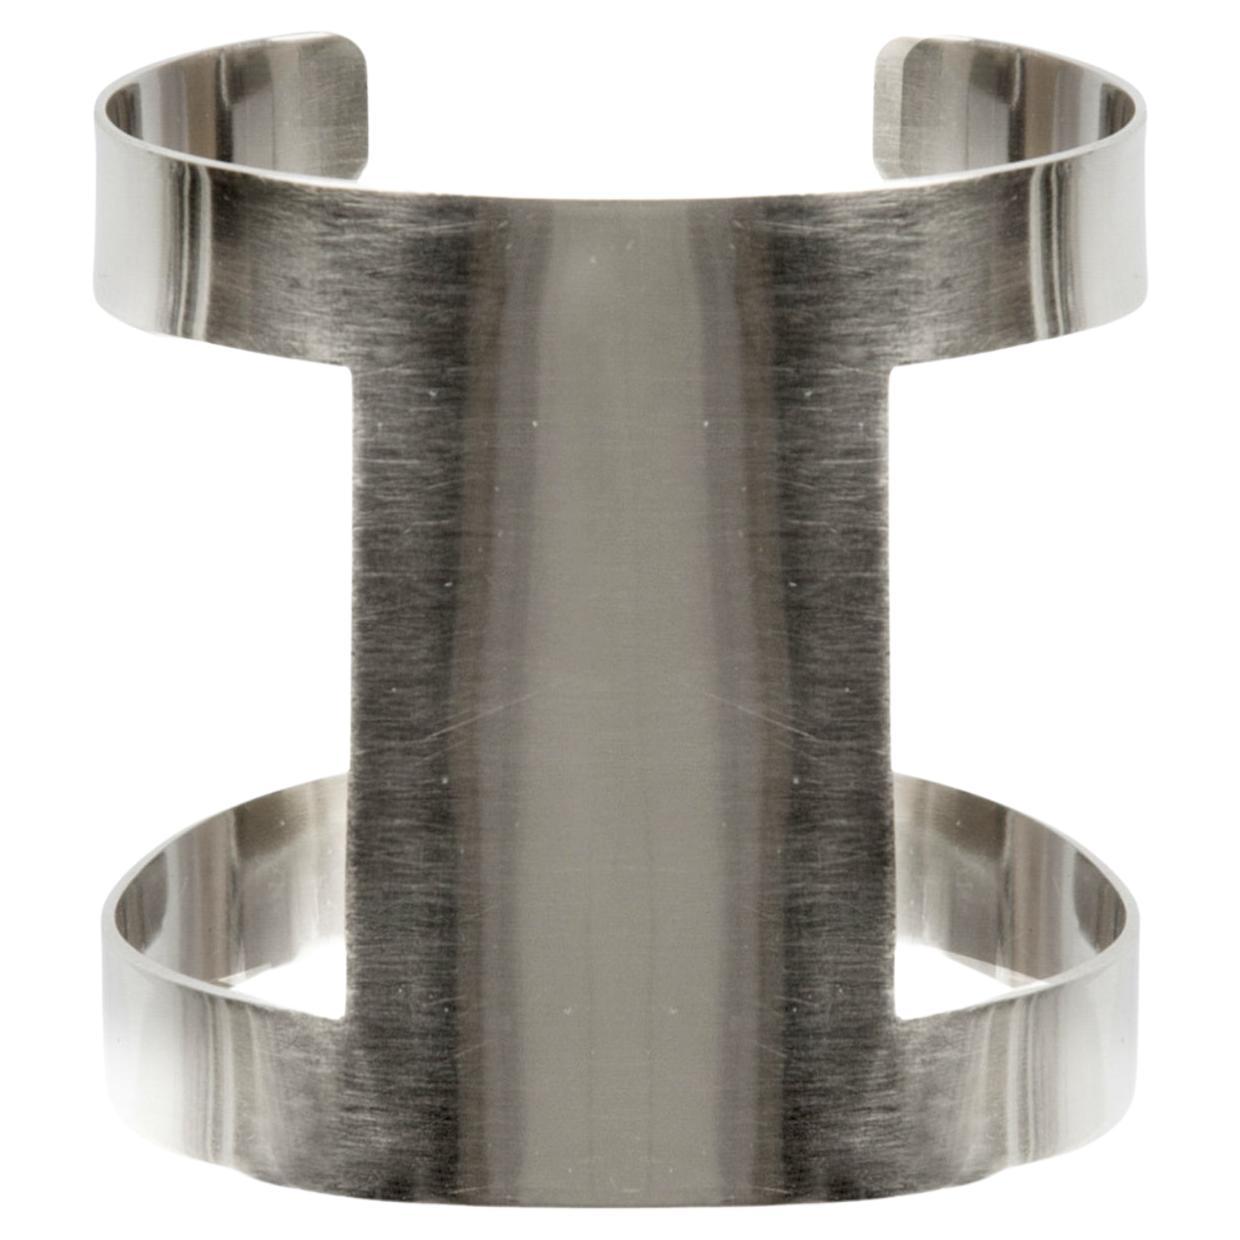 MAUKE V JEWELRY Sterling Silver Statement Cuff with Shiny Finish For Sale